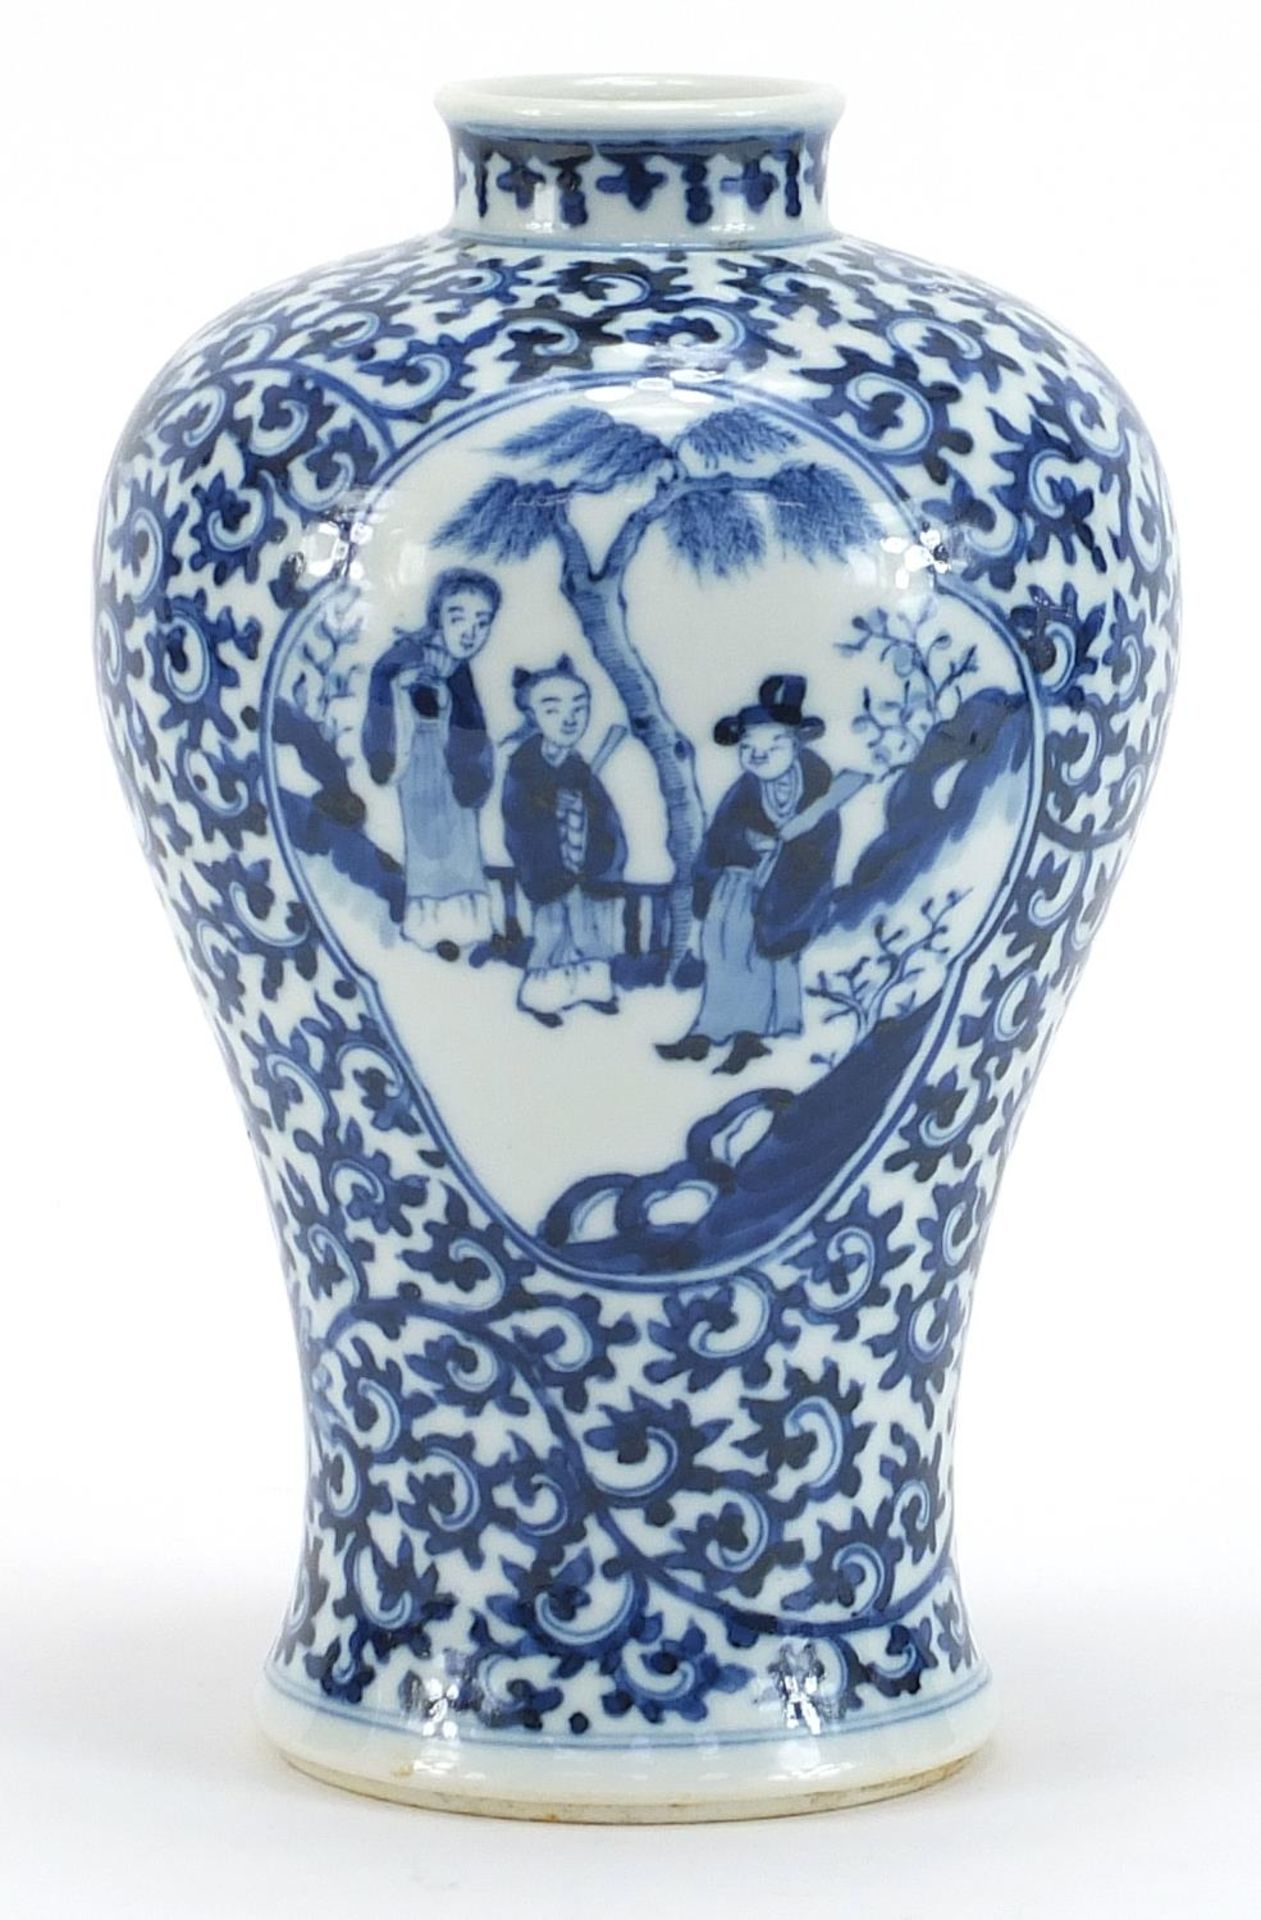 Chinese blue and white porcelain baluster vase hand painted with panels of figures onto a floral